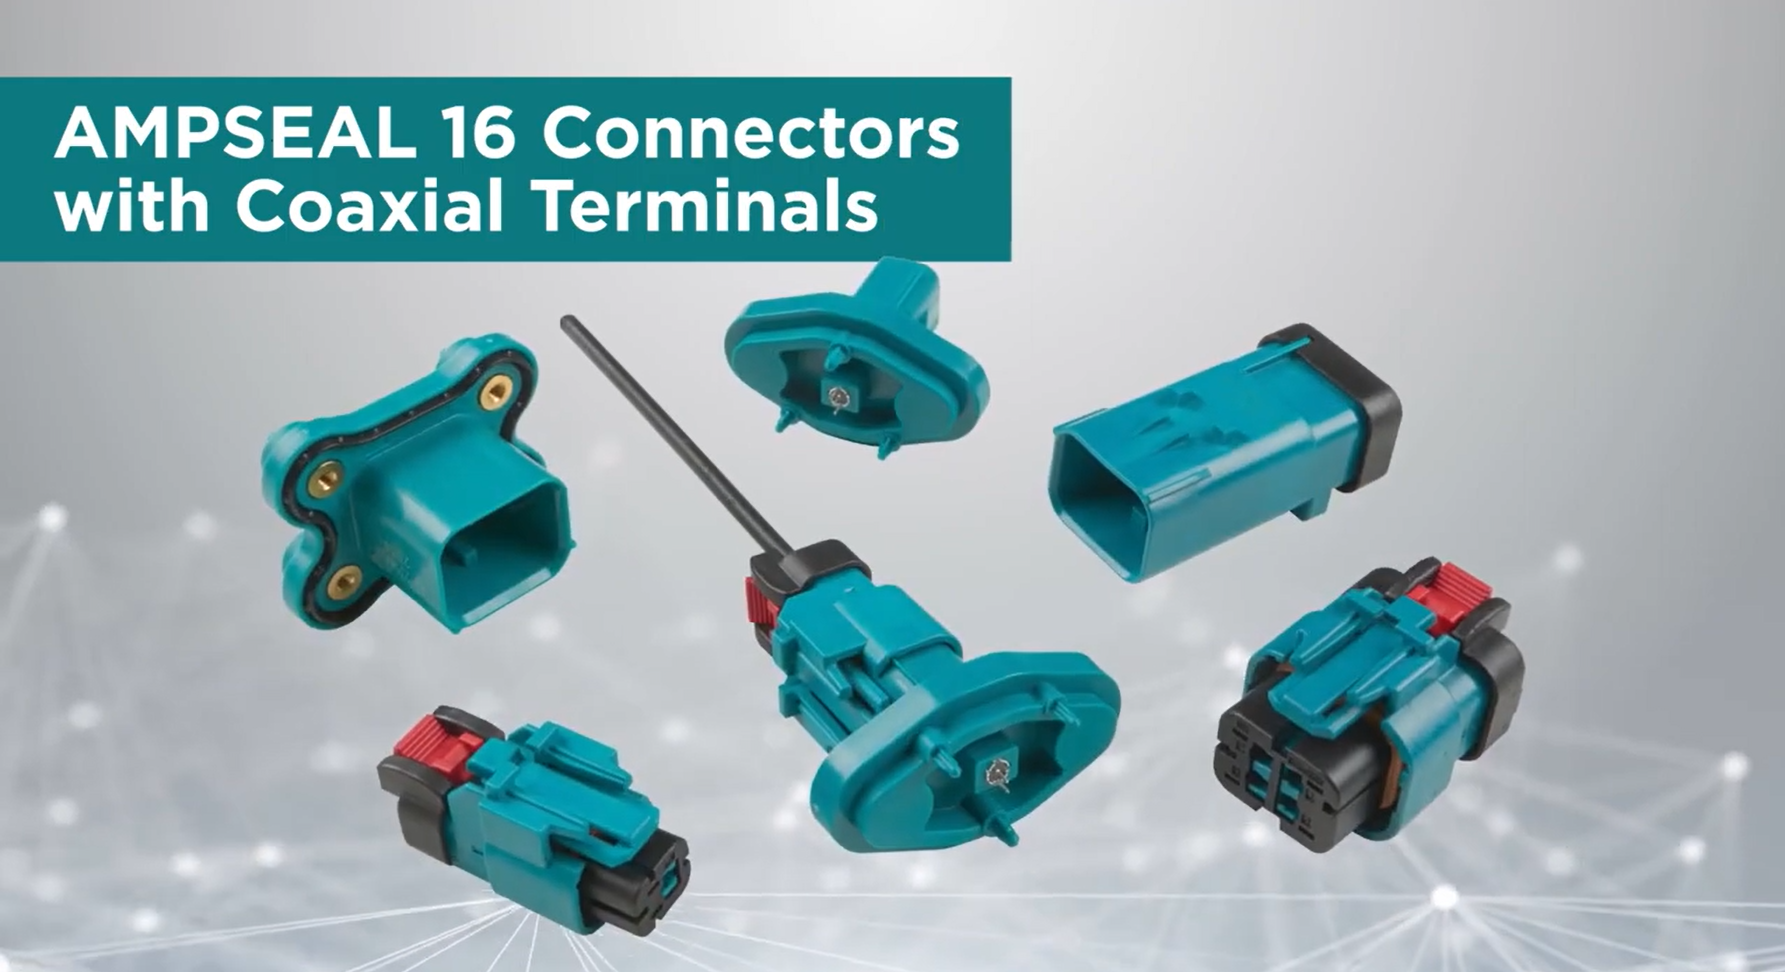  AMPSEAL 16 Connector with Coaxial Terminals